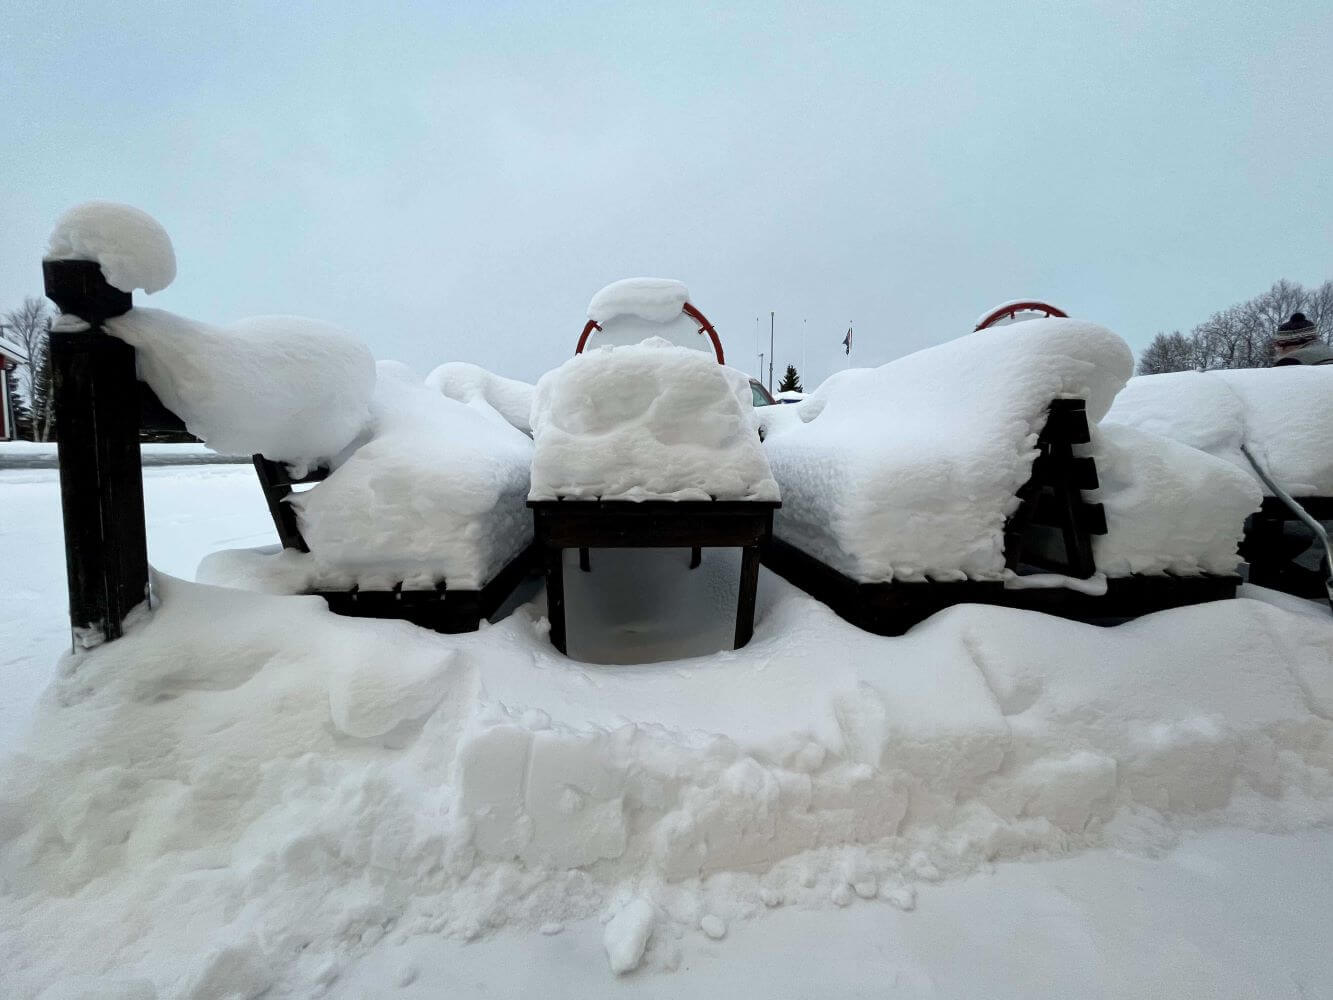 picnic table covered with snow in sweden